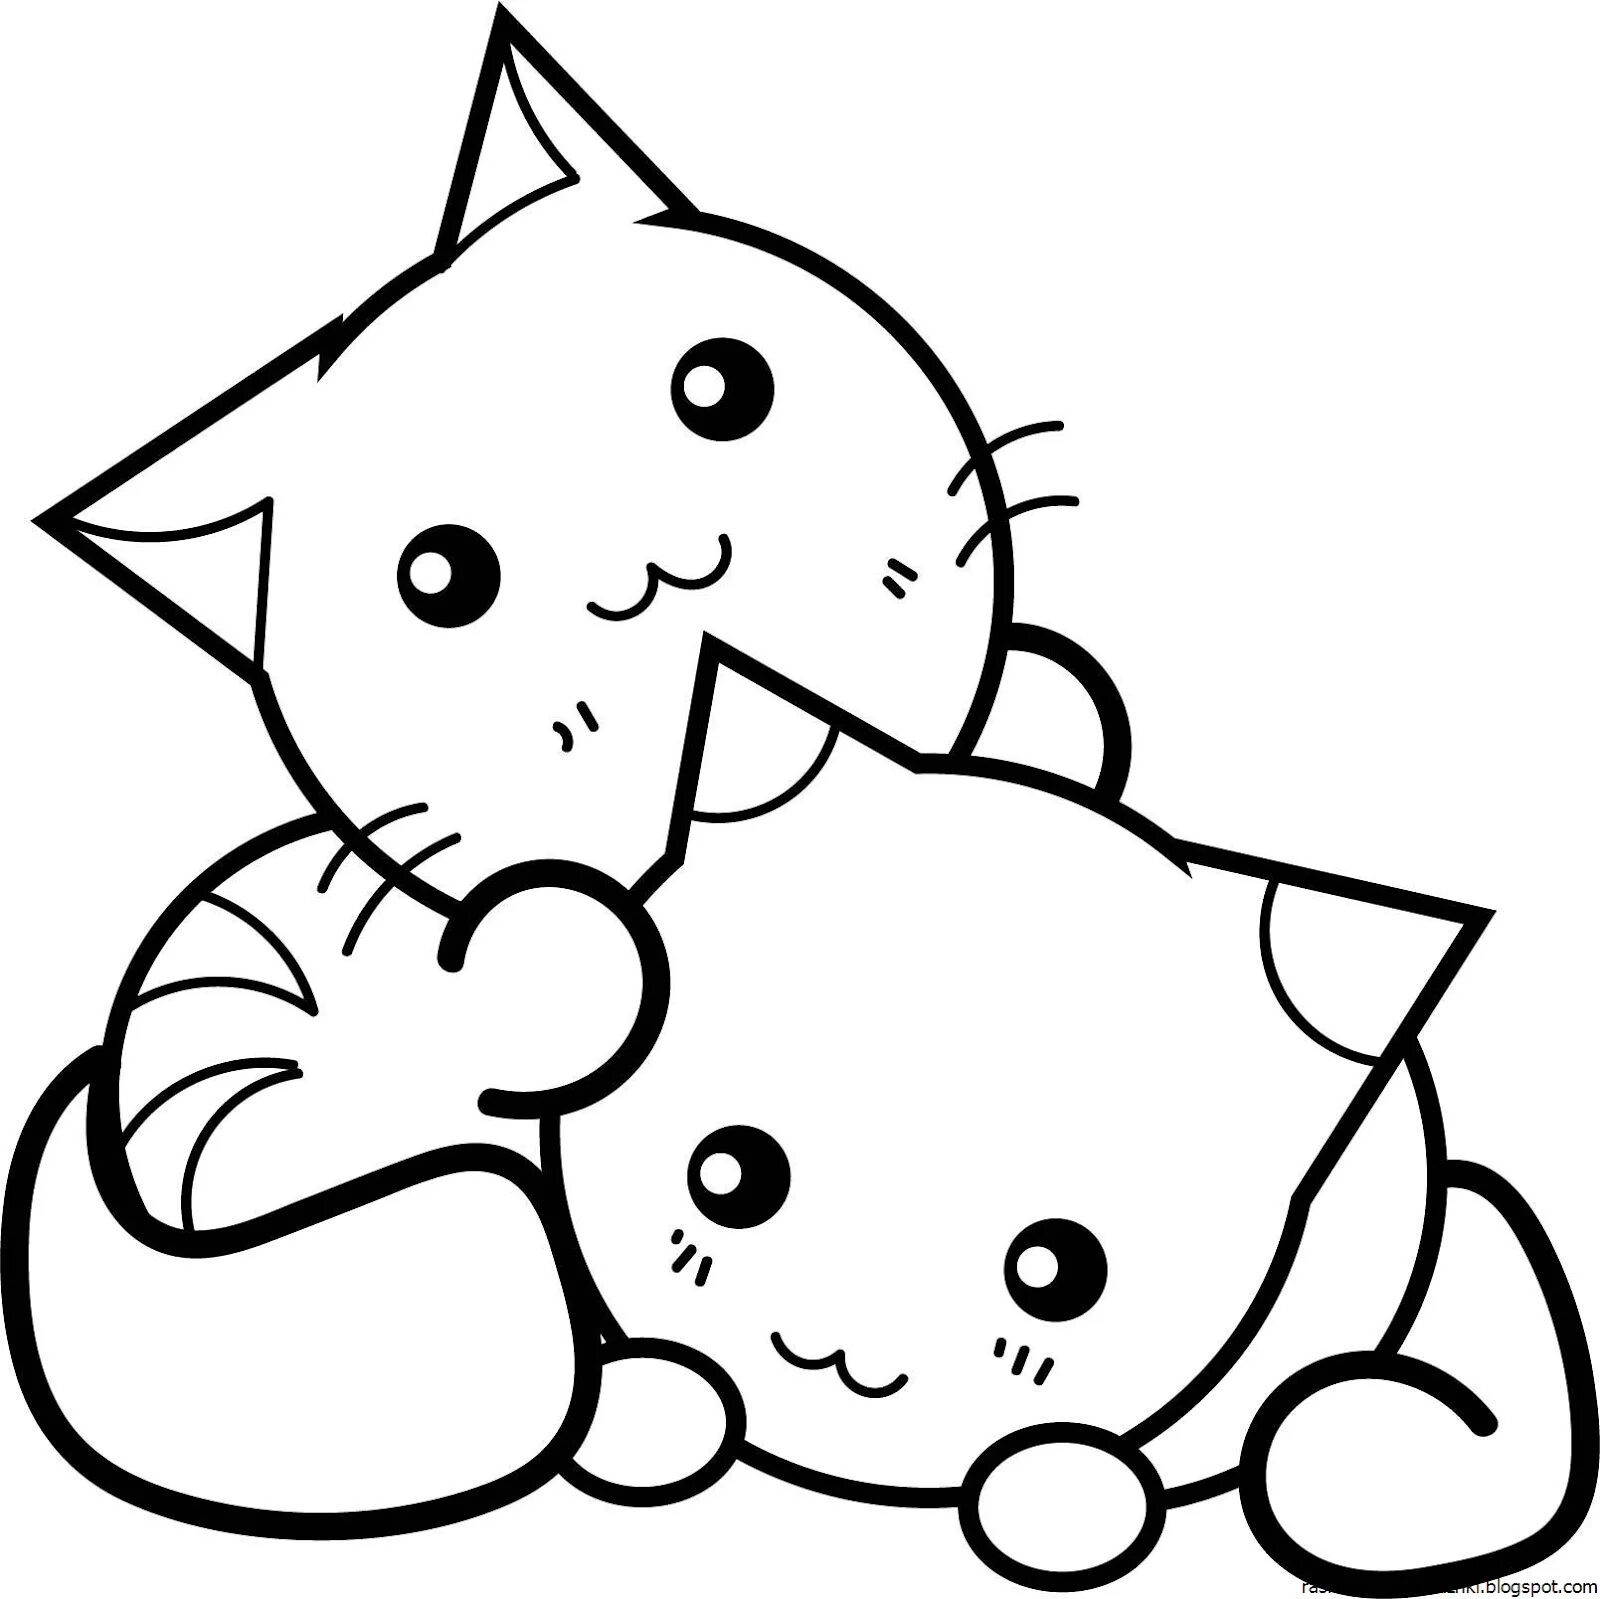 Coloring pages for girls 12 years old cute cats